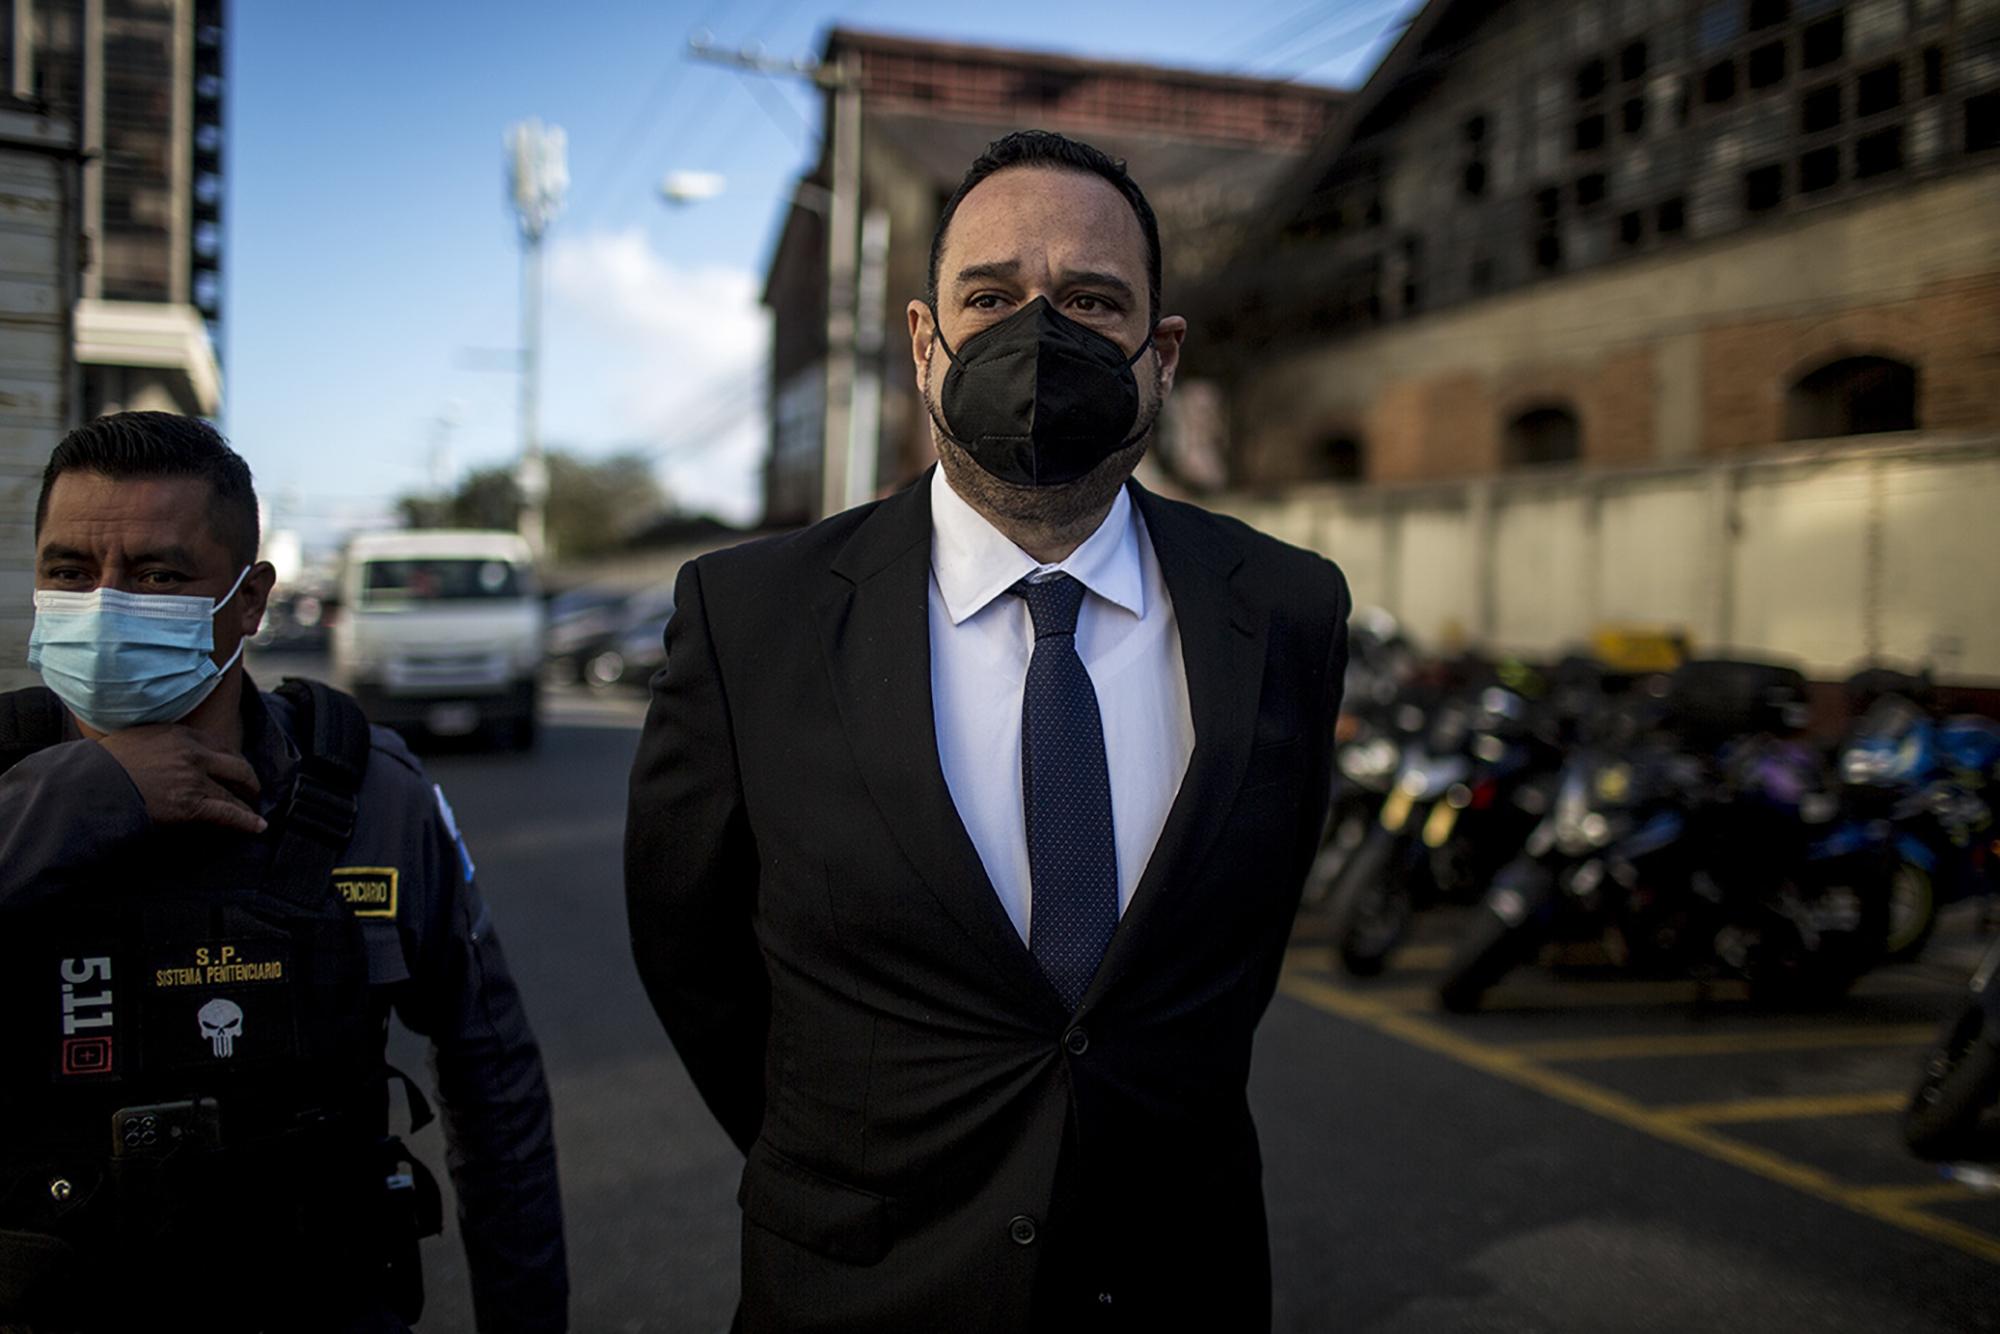 Former minister of communications, infrastructure, and housing in the Morales administration, José Luis Benito, heads to court at Tribunal Towers in Guatemala City on Jan. 28, 2022 for the first hearing in the corruption case known as Libramiento de Chimaltenango. Photo: Simone Dalmasso/El Faro